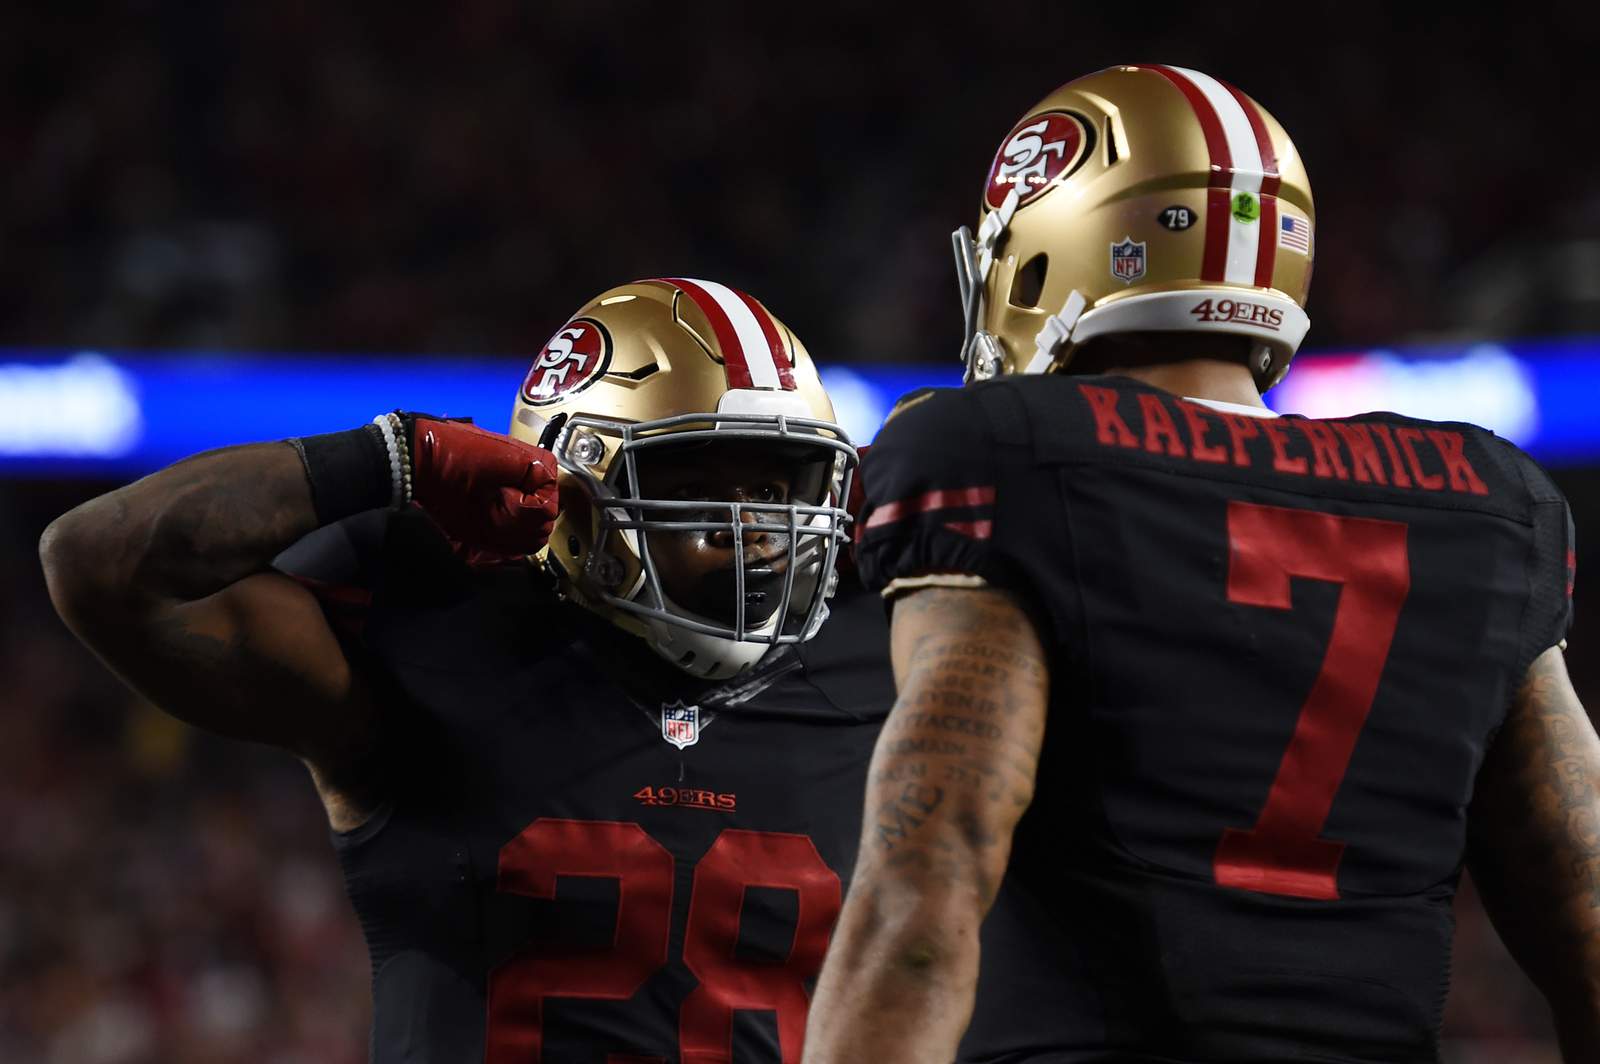 The NFL should re-sign Colin Kaepernick, says Seattle Seahawks running back Carlos Hyde